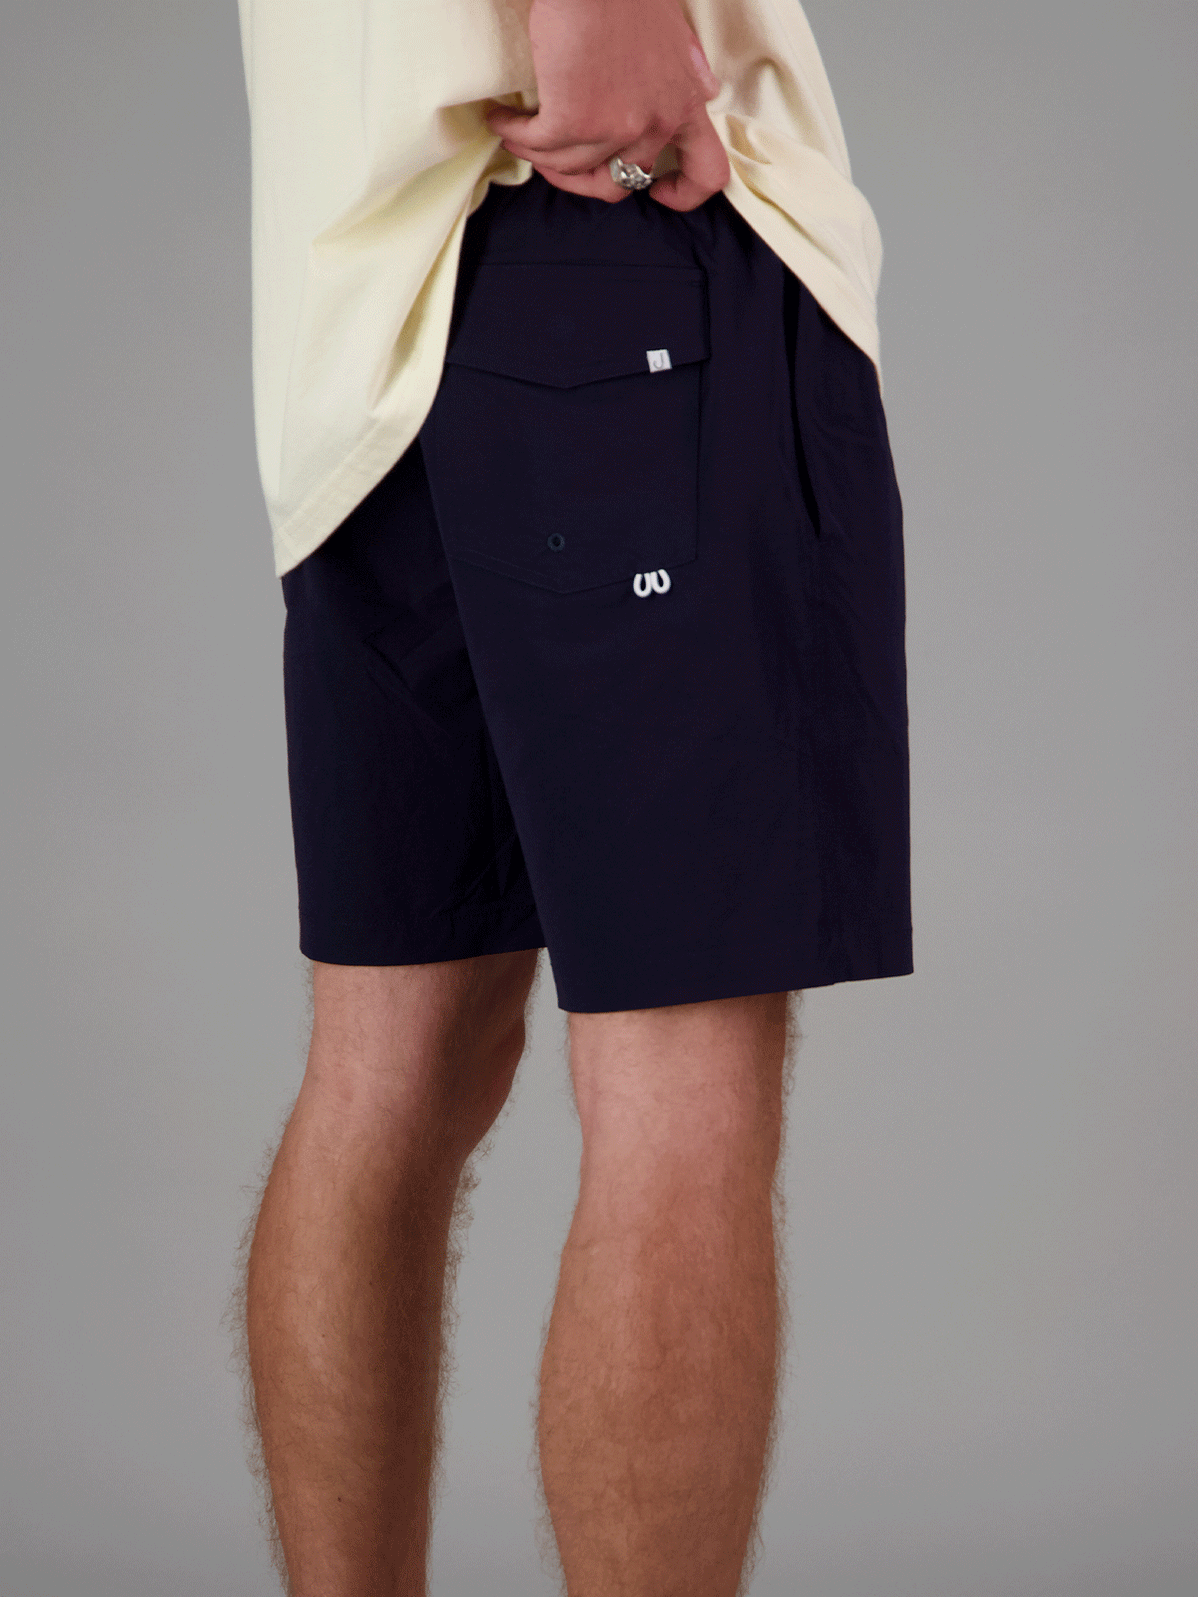 CREWMAN SHORTS - NAVY– Just Another Fisherman